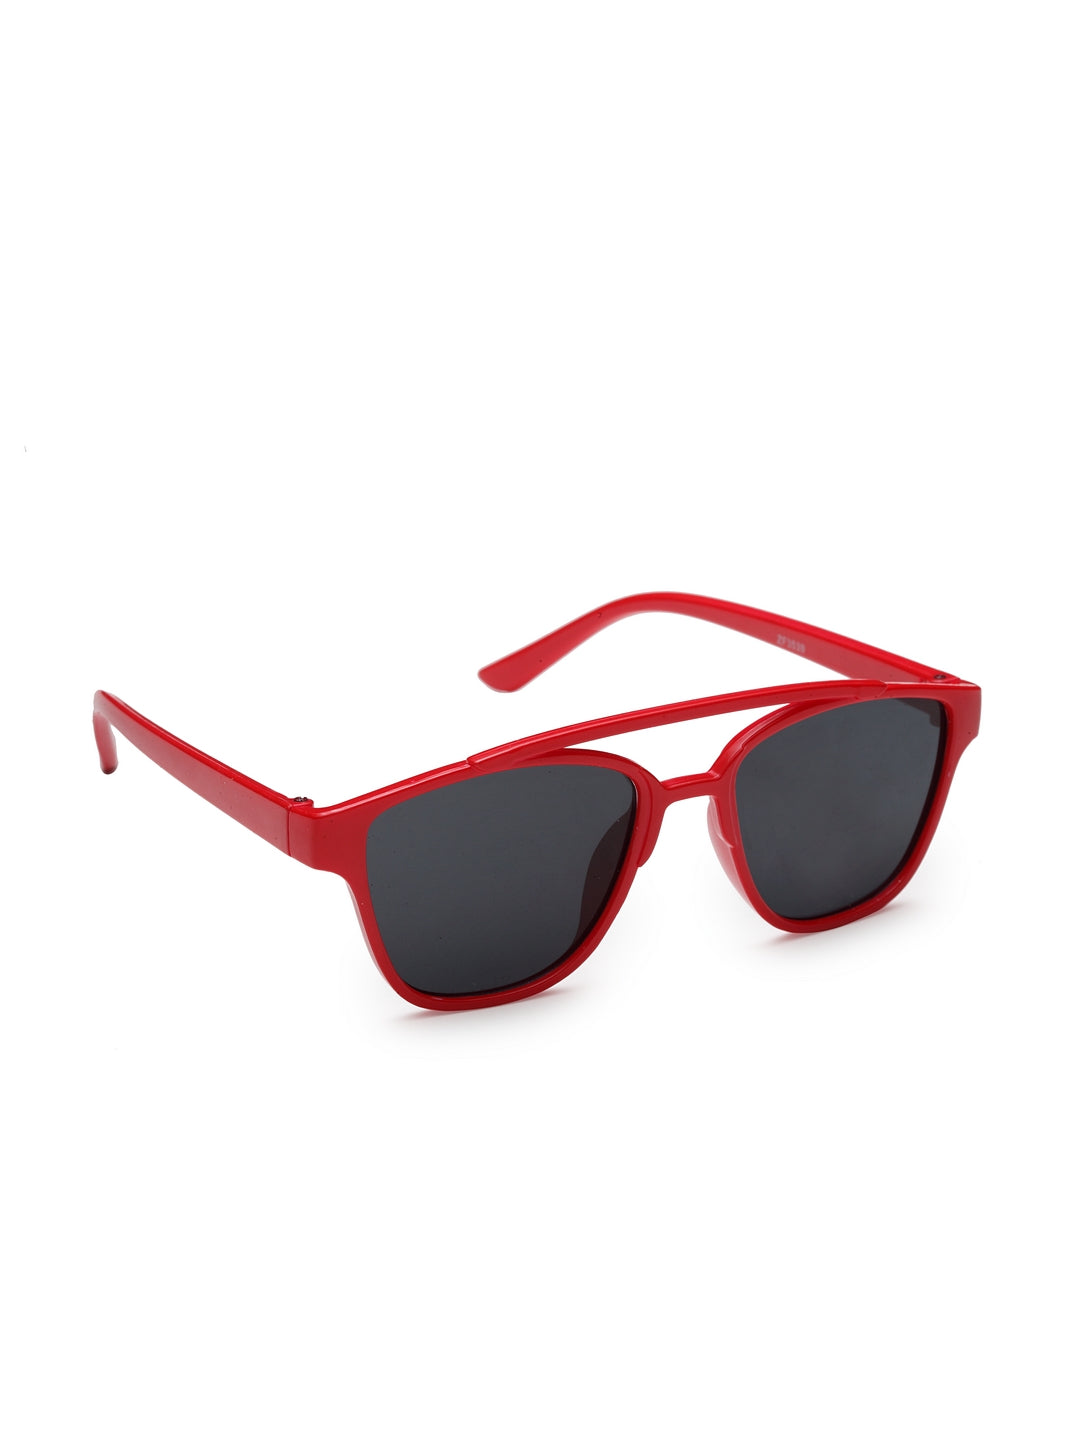 Stol'n Premium Attractive Fashionable UV-Protected Square Shape Sunglasses - Red